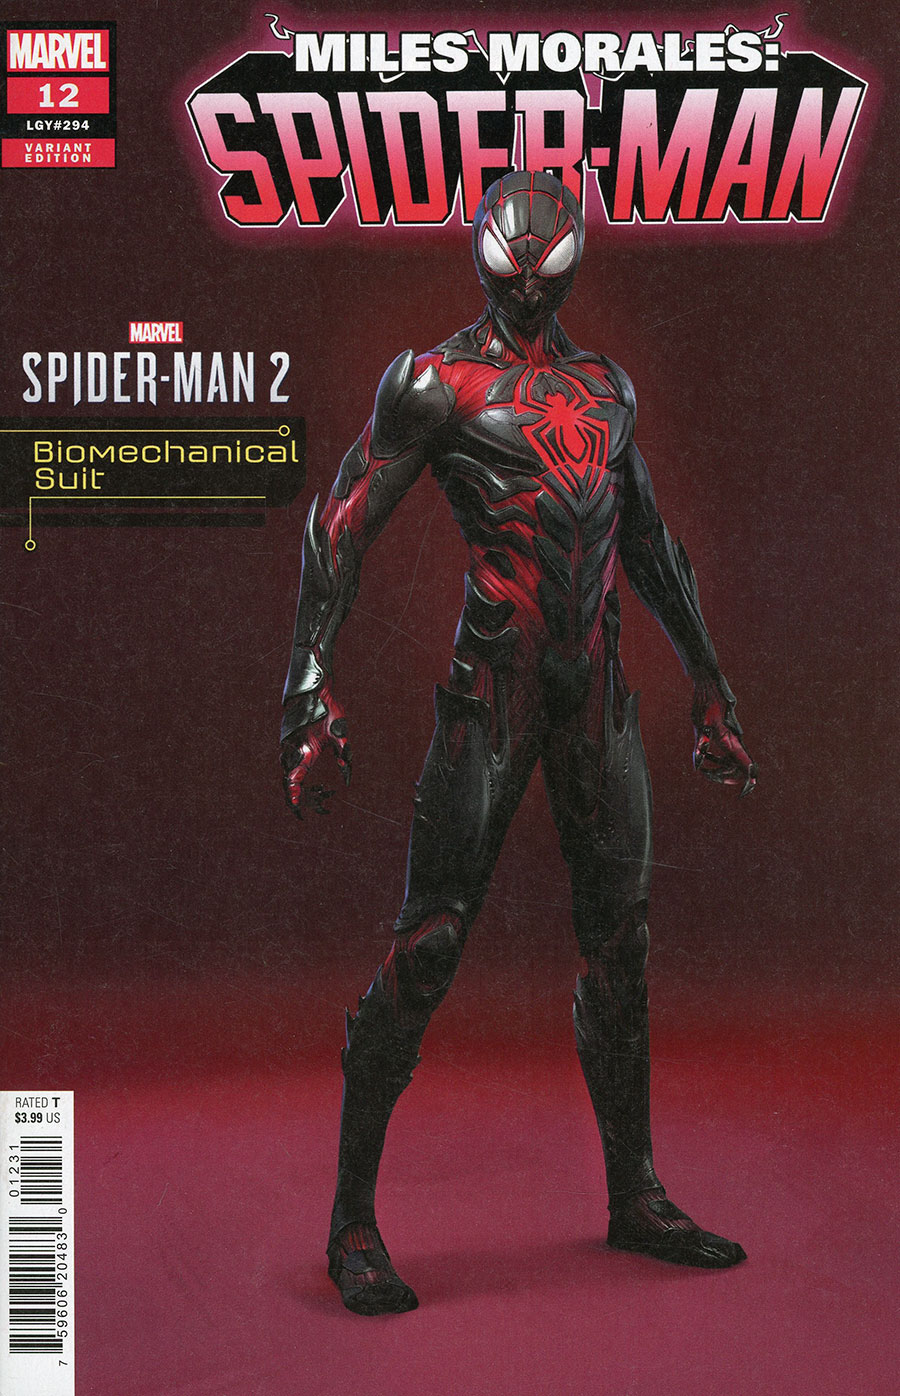 Miles Morales Spider-Man Vol 2 #12 Cover C Variant Marvels Spider-Man 2 Video Game Biomechanical Suit Cover (Gang War First Strike Tie-In)